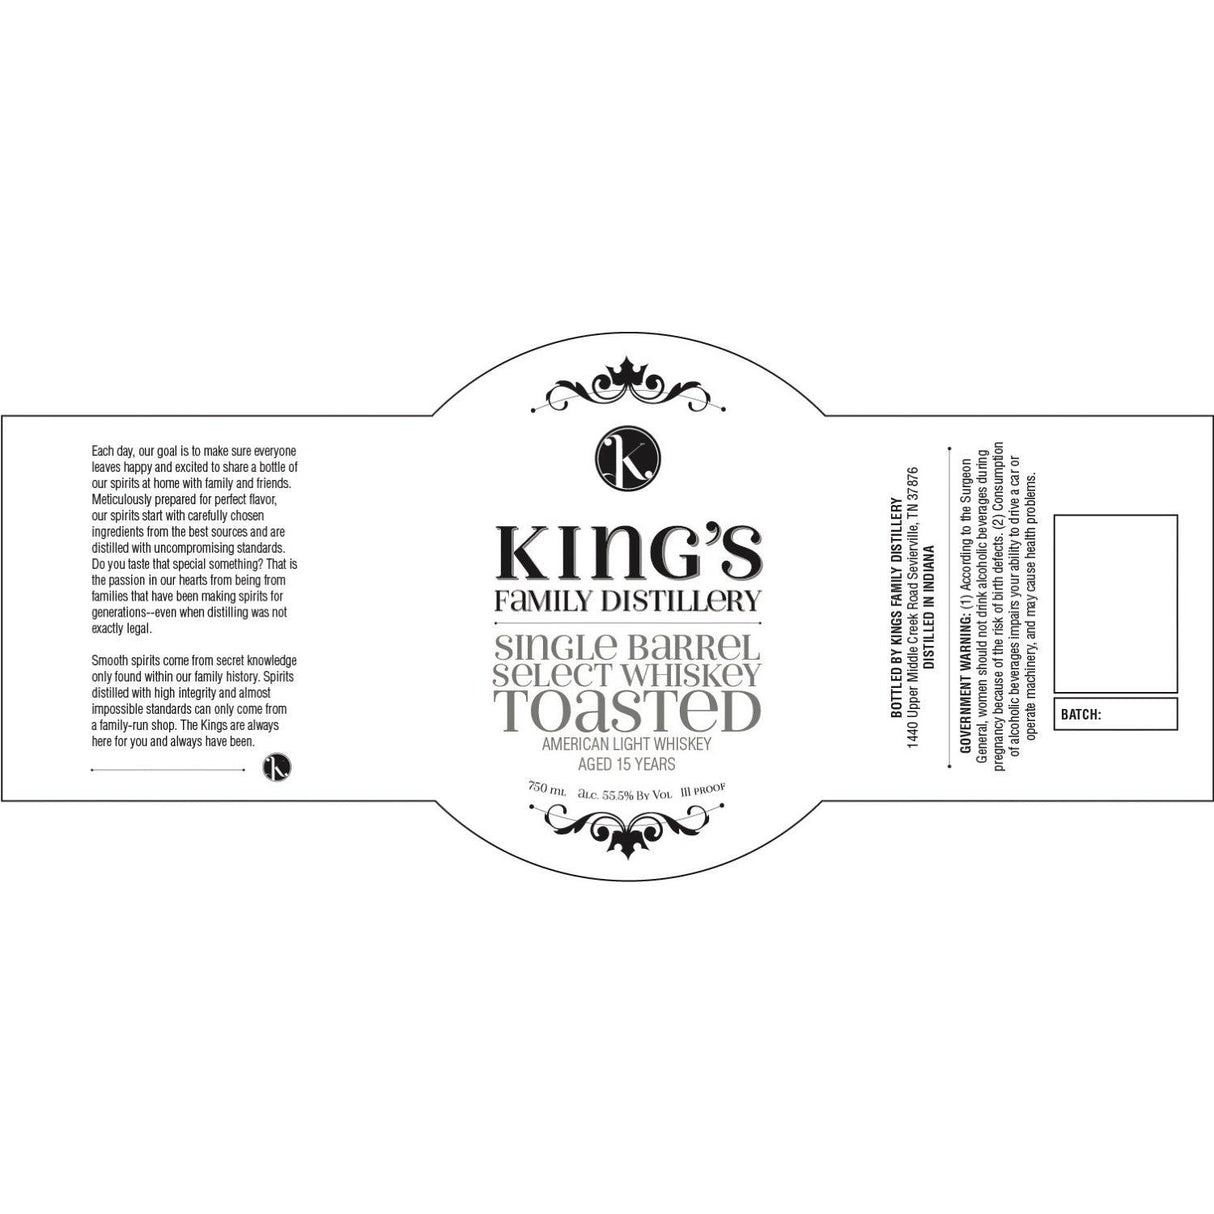 King's Family Distillery 15 Years Old Single Barrel Select "Toasted" American Light Whiskey - De Wine Spot | DWS - Drams/Whiskey, Wines, Sake